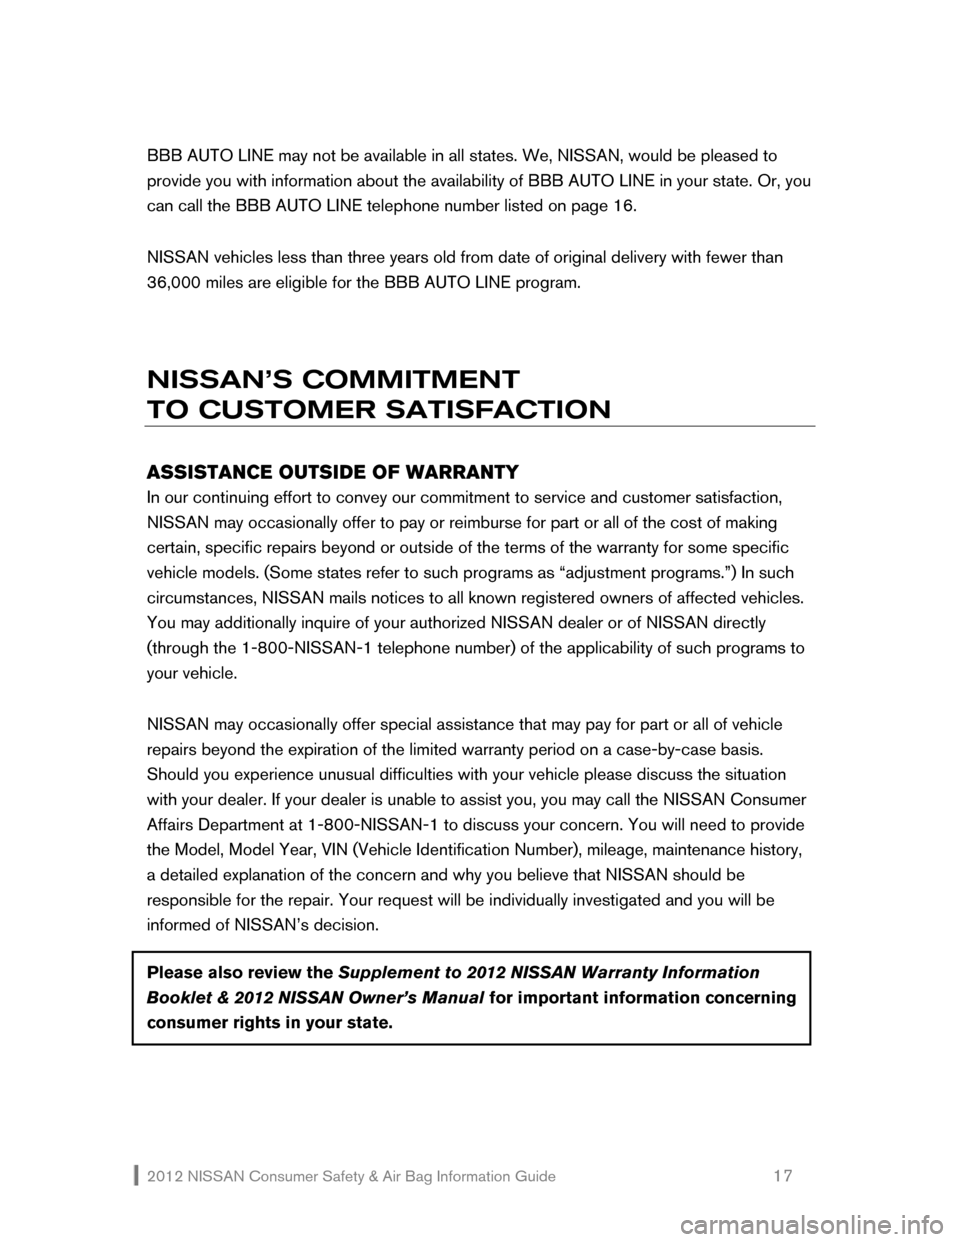 NISSAN 370Z ROADSTER 2012 Z34 Consumer Safety Air Bag Information Guide 2012 NISSAN Consumer Safety & Air Bag Information Guide                                                   17 
BBB AUTO LINE may not be available in all states. We, NISSAN, would be pleased to 
provide